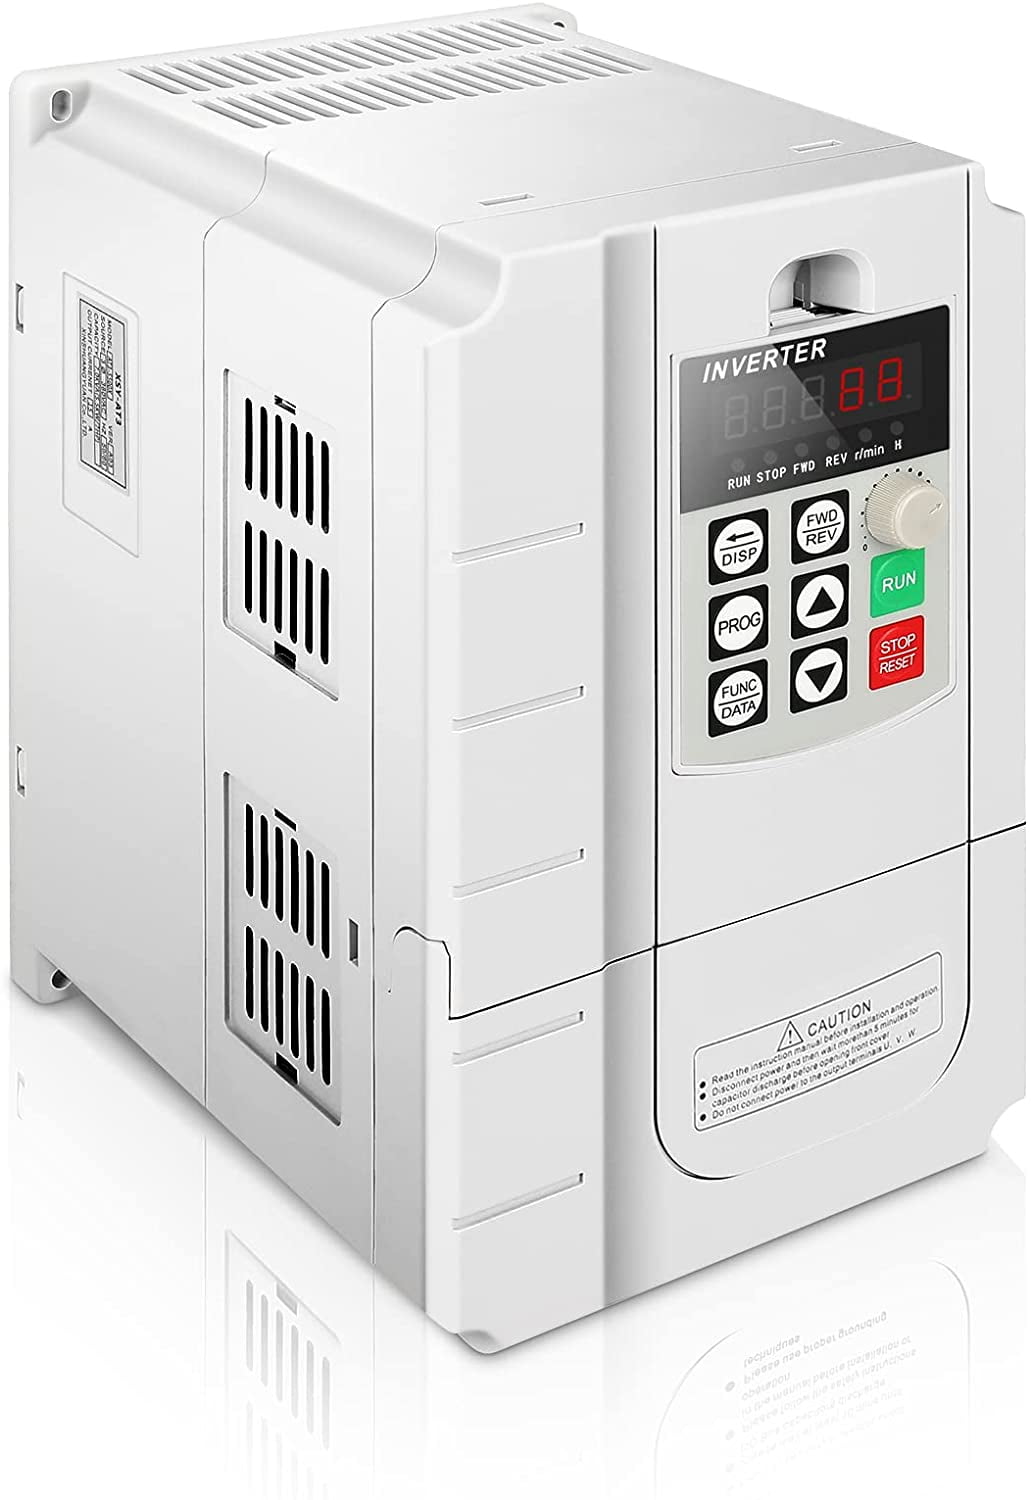 VFD Single To 3 Phase 3A 220V 0.6HP 0.45KW Variable Frequency Drive Inverter 